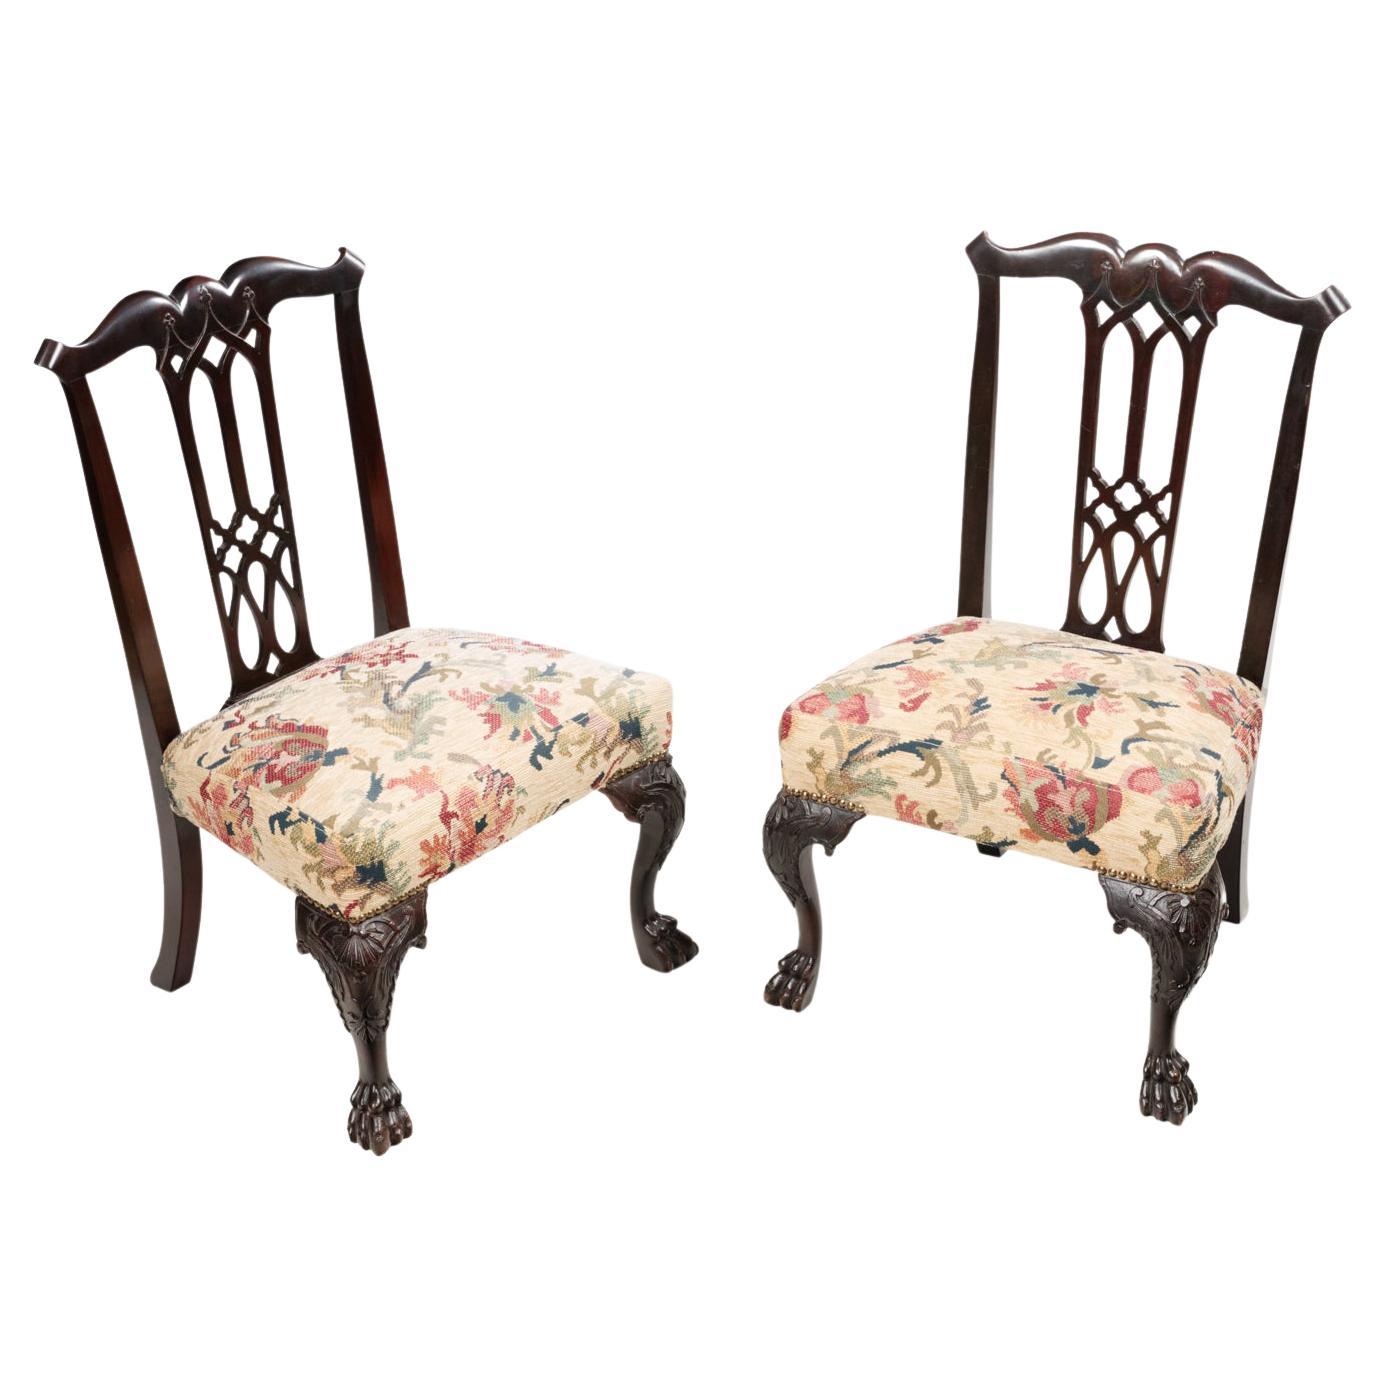 Pair of 18th Century Irish Miniature Chairs, Attributed to Butler of Dublin For Sale